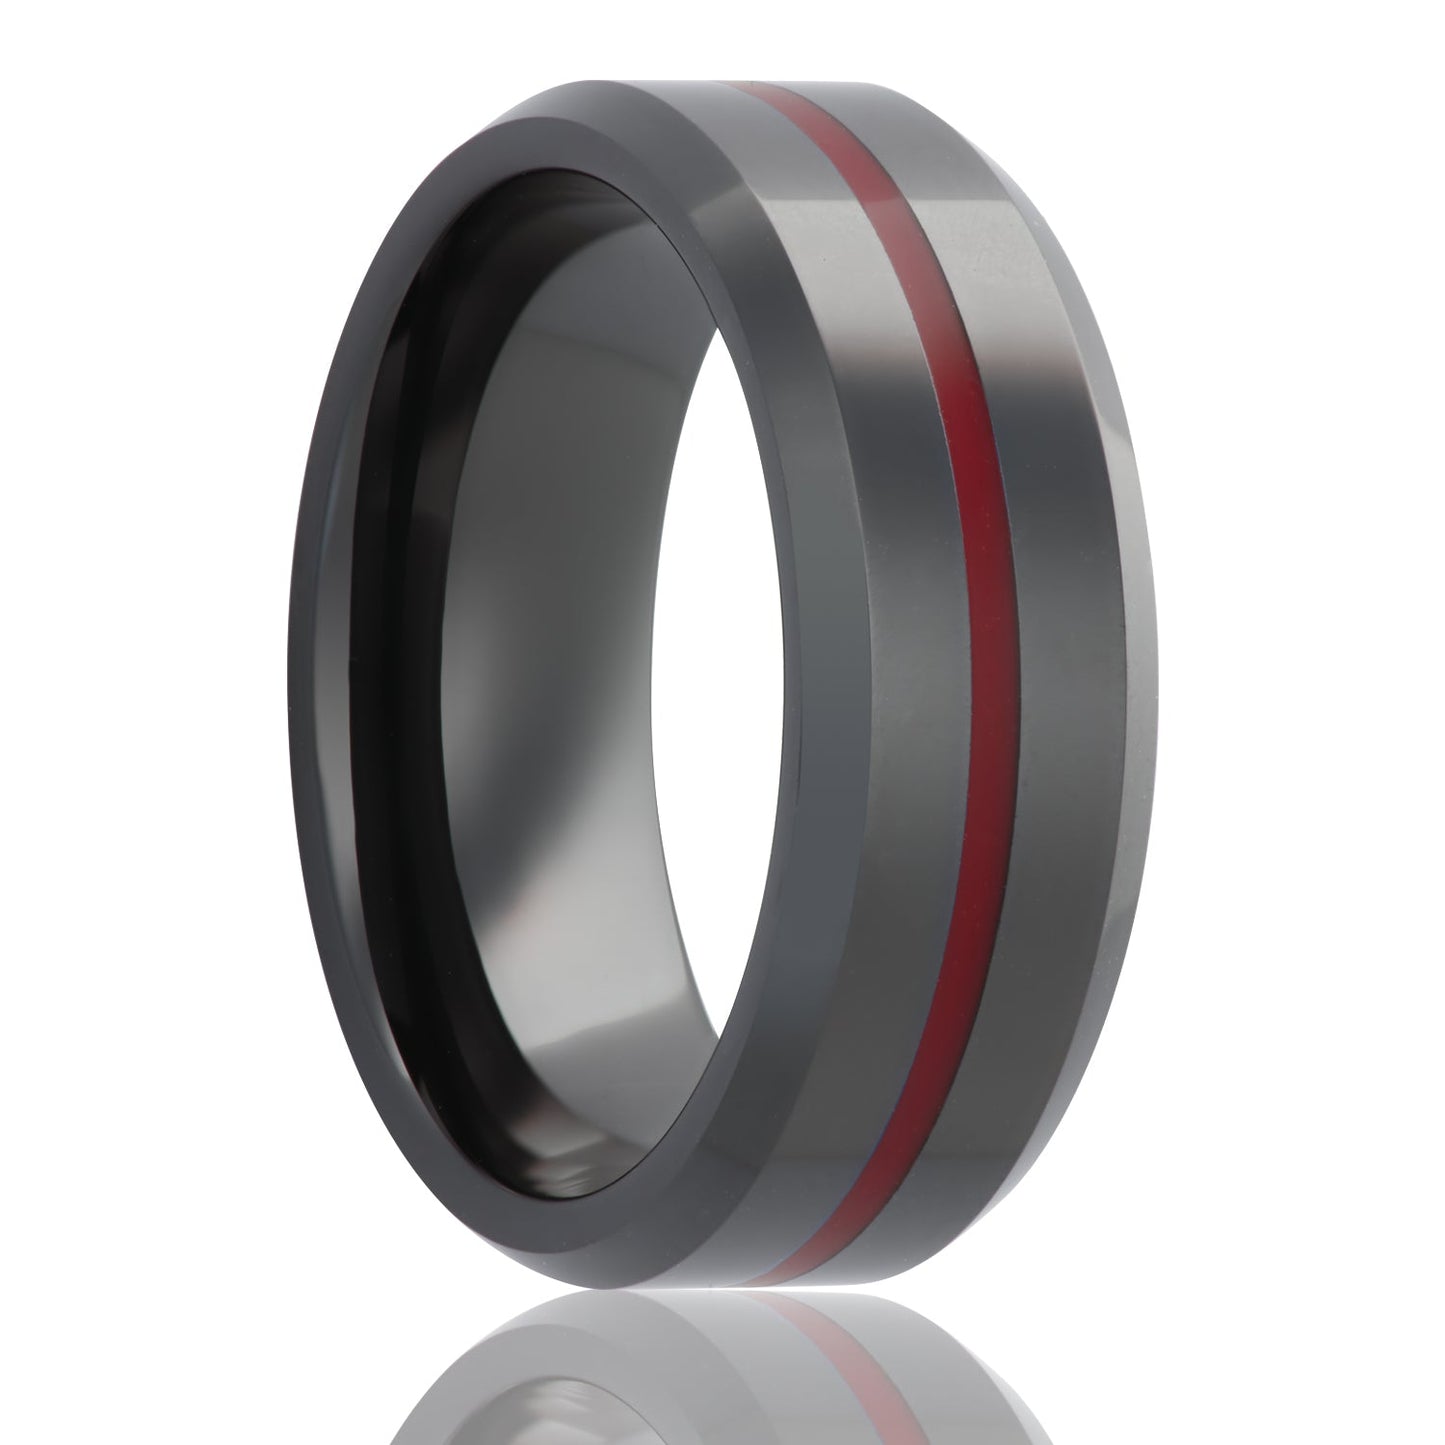 A black ceramic wedding band with red groove & beveled displayed on a neutral white background.